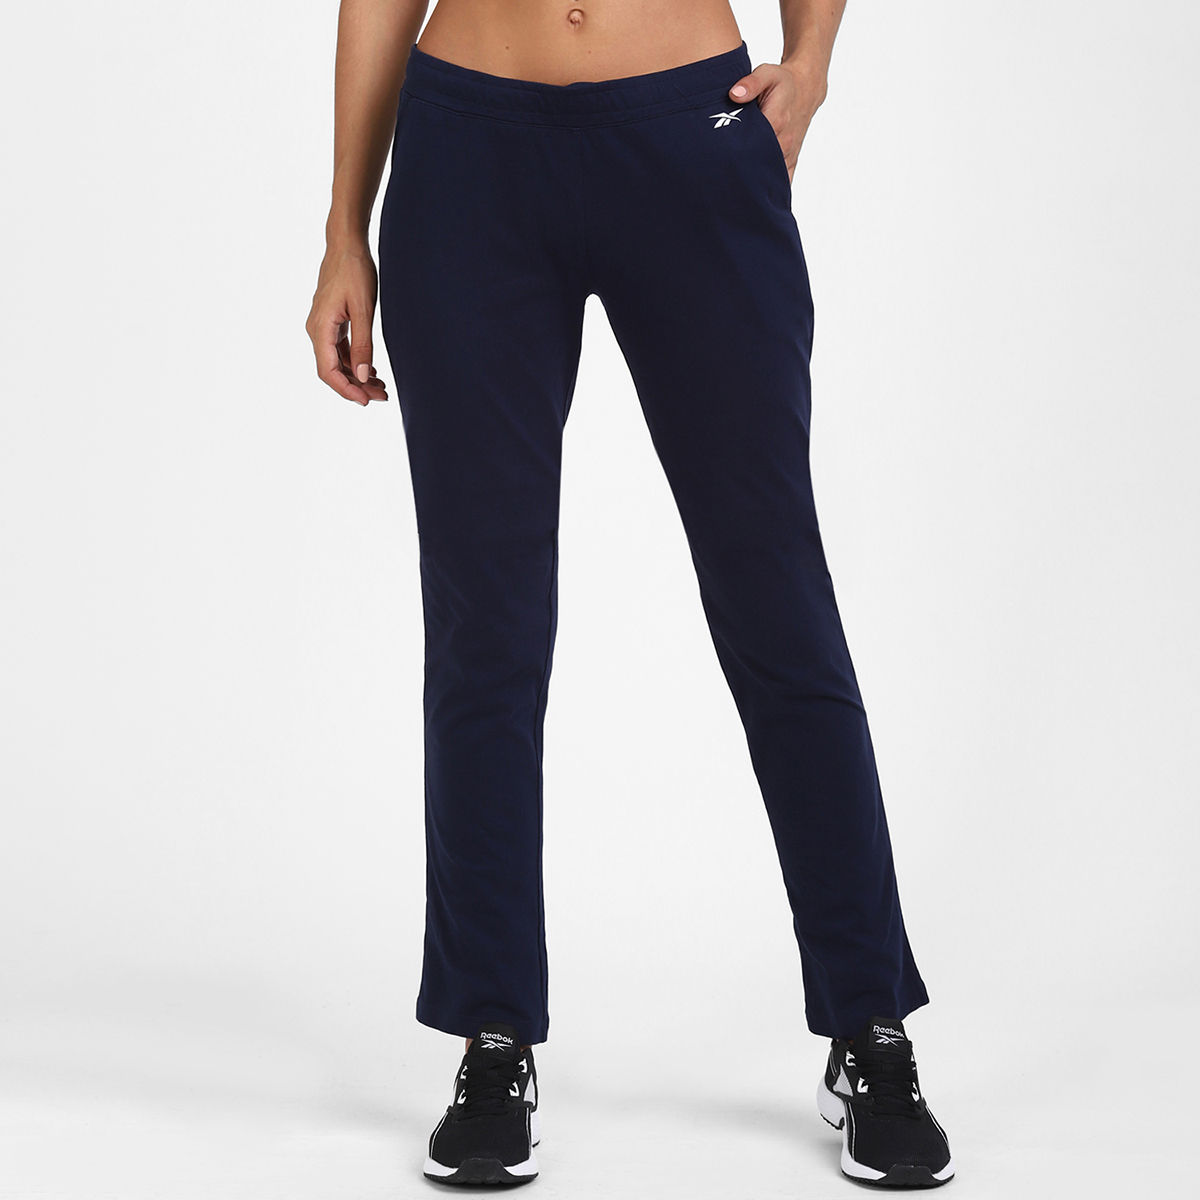 Reebok Rbk Knit Pant Black Training Track Pant Buy Reebok Rbk Knit Pant  Black Training Track Pant Online at Best Price in India  Nykaa